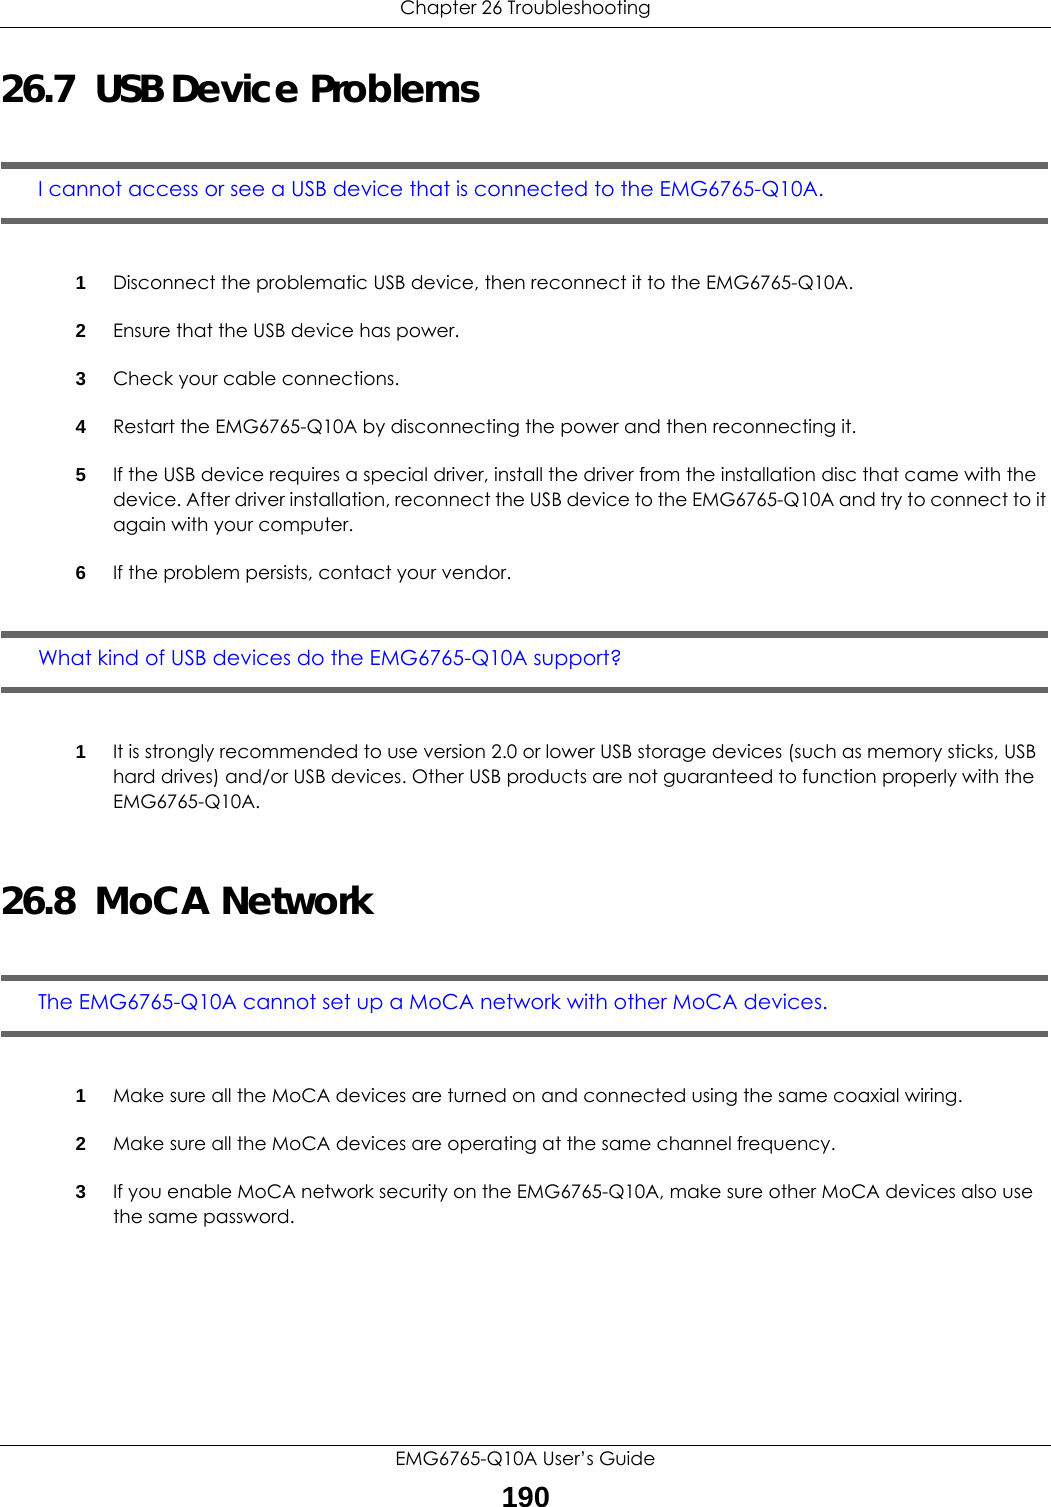 Chapter 26 TroubleshootingEMG6765-Q10A User’s Guide19026.7  USB Device ProblemsI cannot access or see a USB device that is connected to the EMG6765-Q10A.1Disconnect the problematic USB device, then reconnect it to the EMG6765-Q10A.2Ensure that the USB device has power.3Check your cable connections.4Restart the EMG6765-Q10A by disconnecting the power and then reconnecting it.5If the USB device requires a special driver, install the driver from the installation disc that came with the device. After driver installation, reconnect the USB device to the EMG6765-Q10A and try to connect to it again with your computer.6If the problem persists, contact your vendor.What kind of USB devices do the EMG6765-Q10A support?1It is strongly recommended to use version 2.0 or lower USB storage devices (such as memory sticks, USB hard drives) and/or USB devices. Other USB products are not guaranteed to function properly with the EMG6765-Q10A.26.8  MoCA NetworkThe EMG6765-Q10A cannot set up a MoCA network with other MoCA devices.1Make sure all the MoCA devices are turned on and connected using the same coaxial wiring.2Make sure all the MoCA devices are operating at the same channel frequency.3If you enable MoCA network security on the EMG6765-Q10A, make sure other MoCA devices also use the same password.